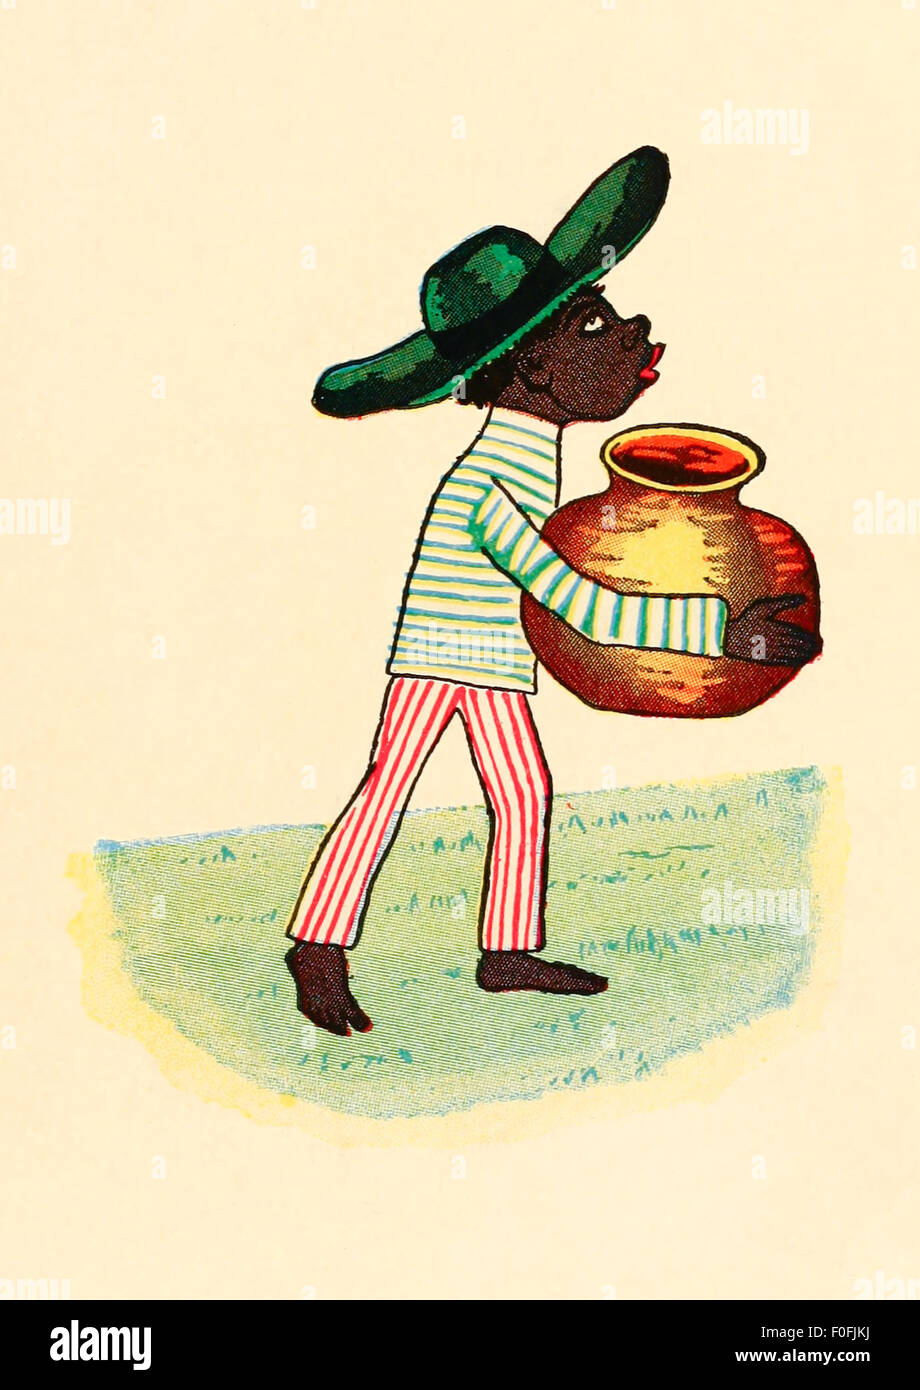 Black Jumbo with his big brass pot collects the Tiger butter. Image from 'The Story of Little Black Sambo' by Helen Bannerman. See description for more information. Stock Photo